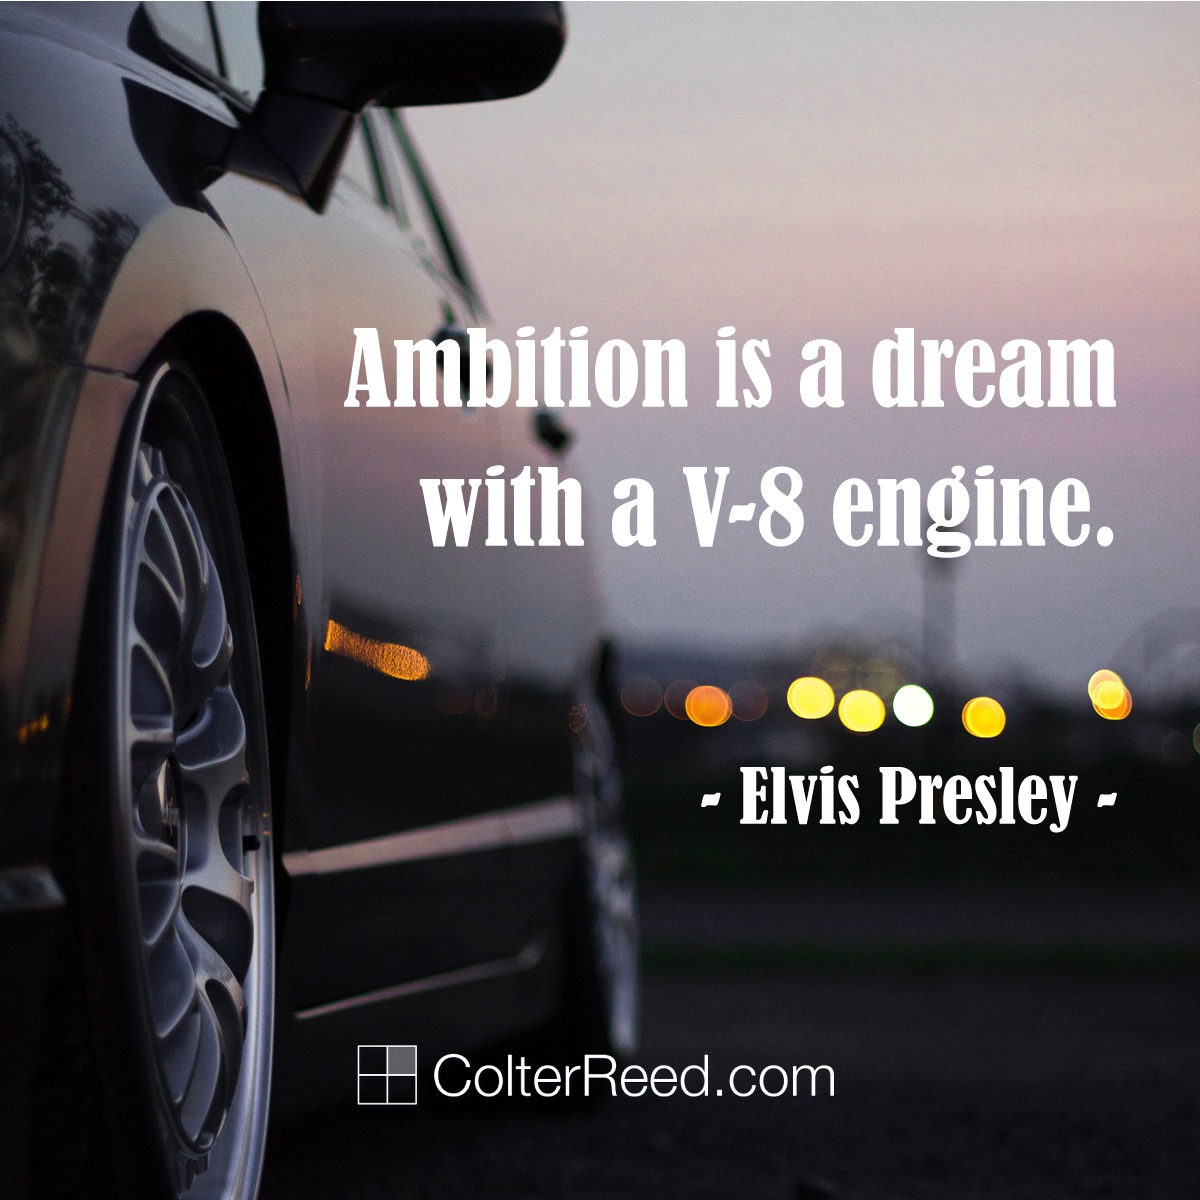 Ambition is a dream with a V-8 engine. —Elvis Presley